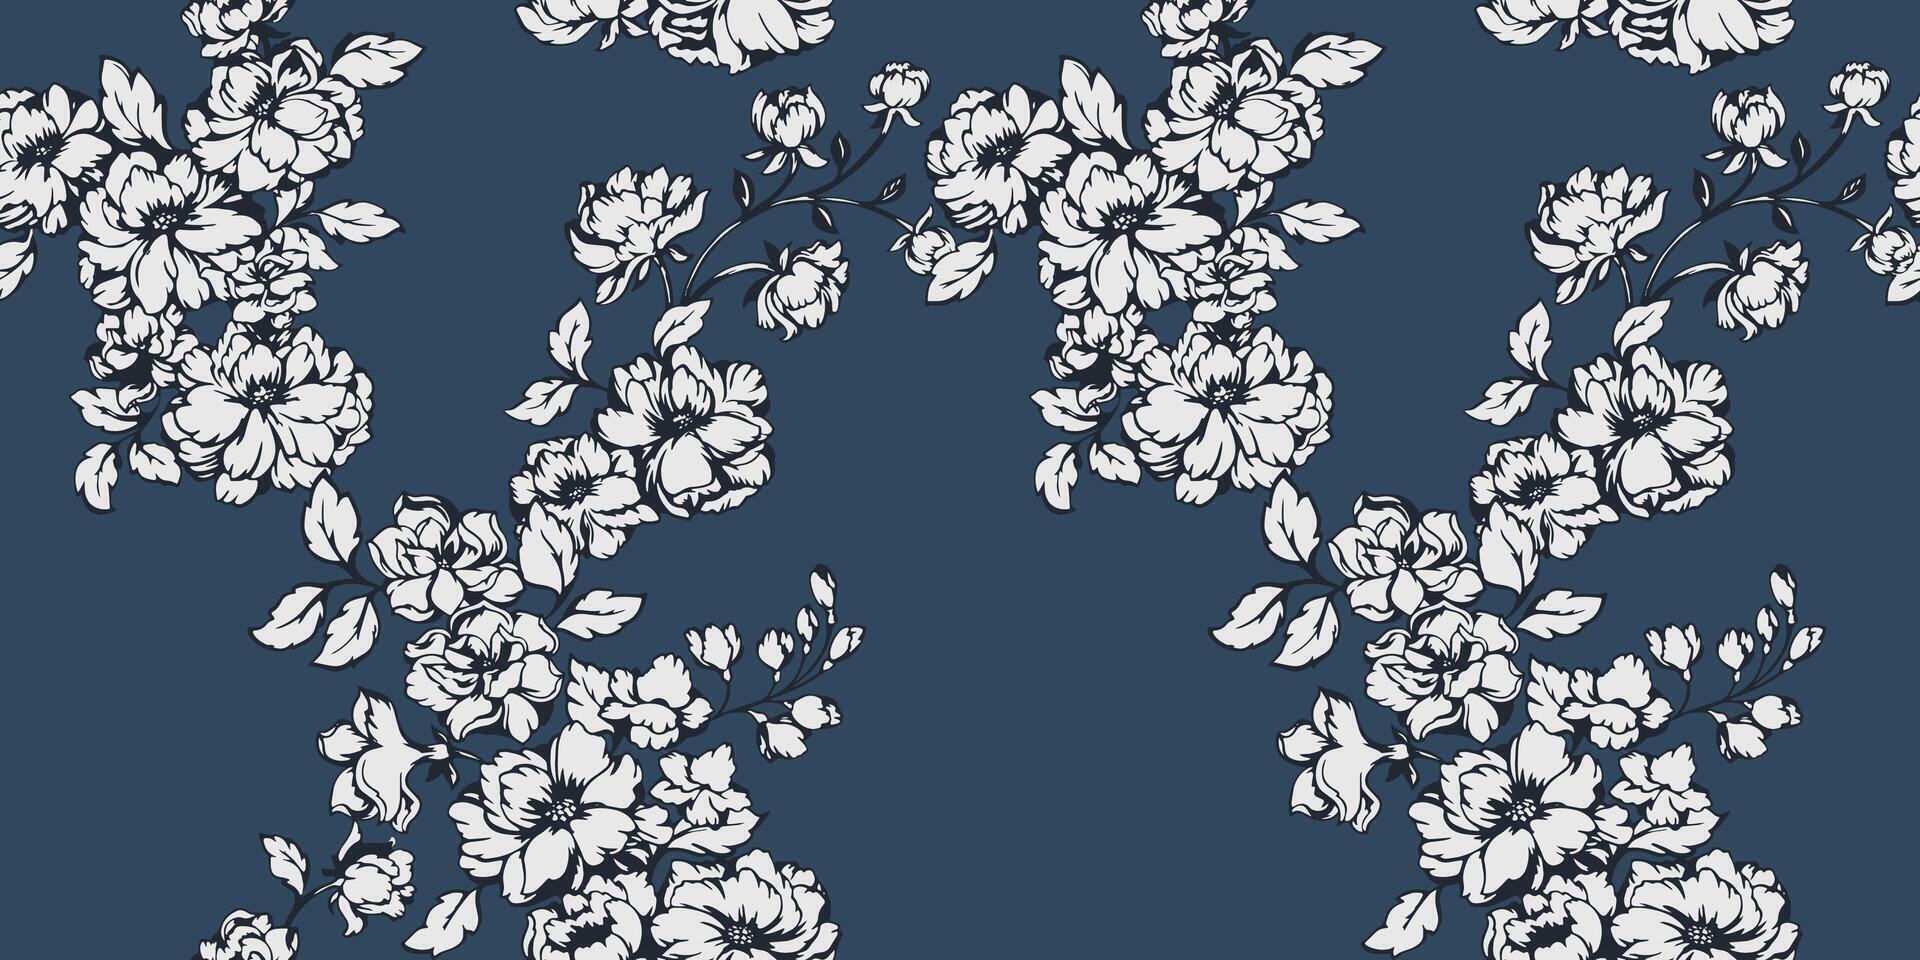 Dark monotone stylized floral seamless pattern. Abstract artistic branches flowers with buds leaves background. Vector drawn stylized  illustration. Template for design, fashion, printing, fabric